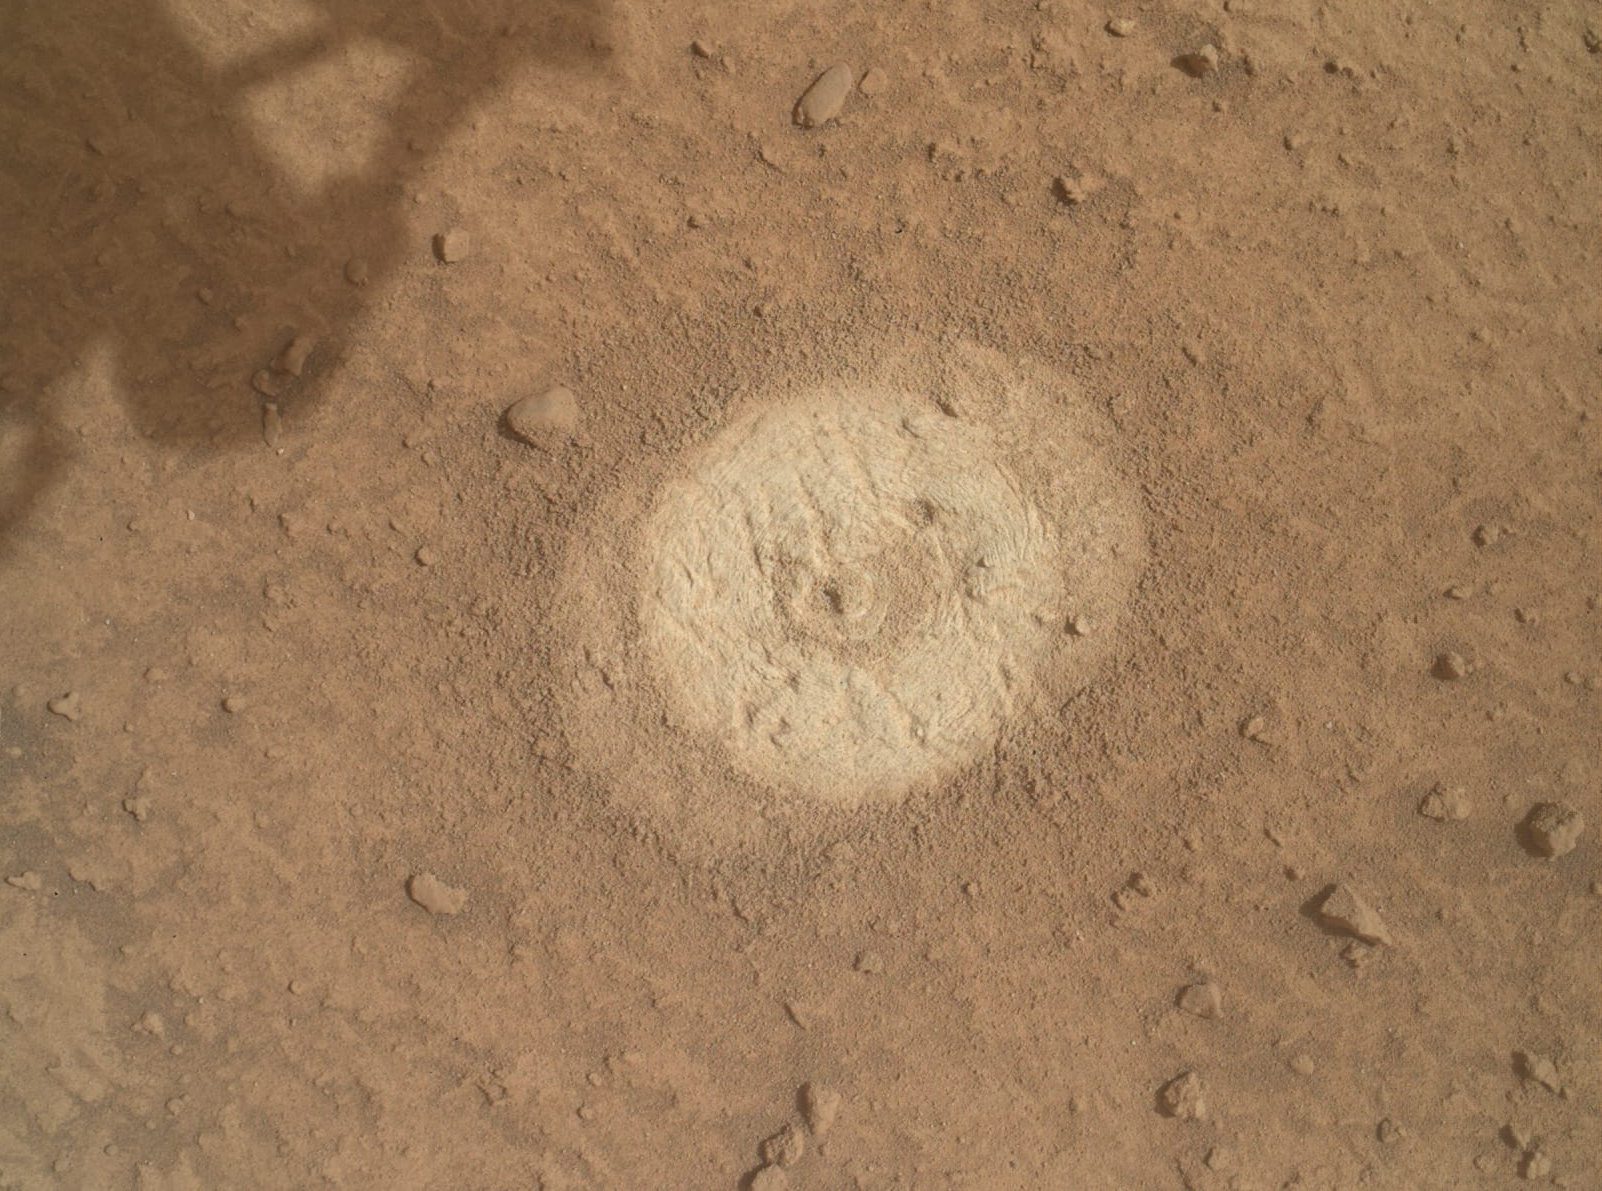 MAHLI image of "Mammoth Lakes," which we had hoped would become our 41st drill hole after today's plan.